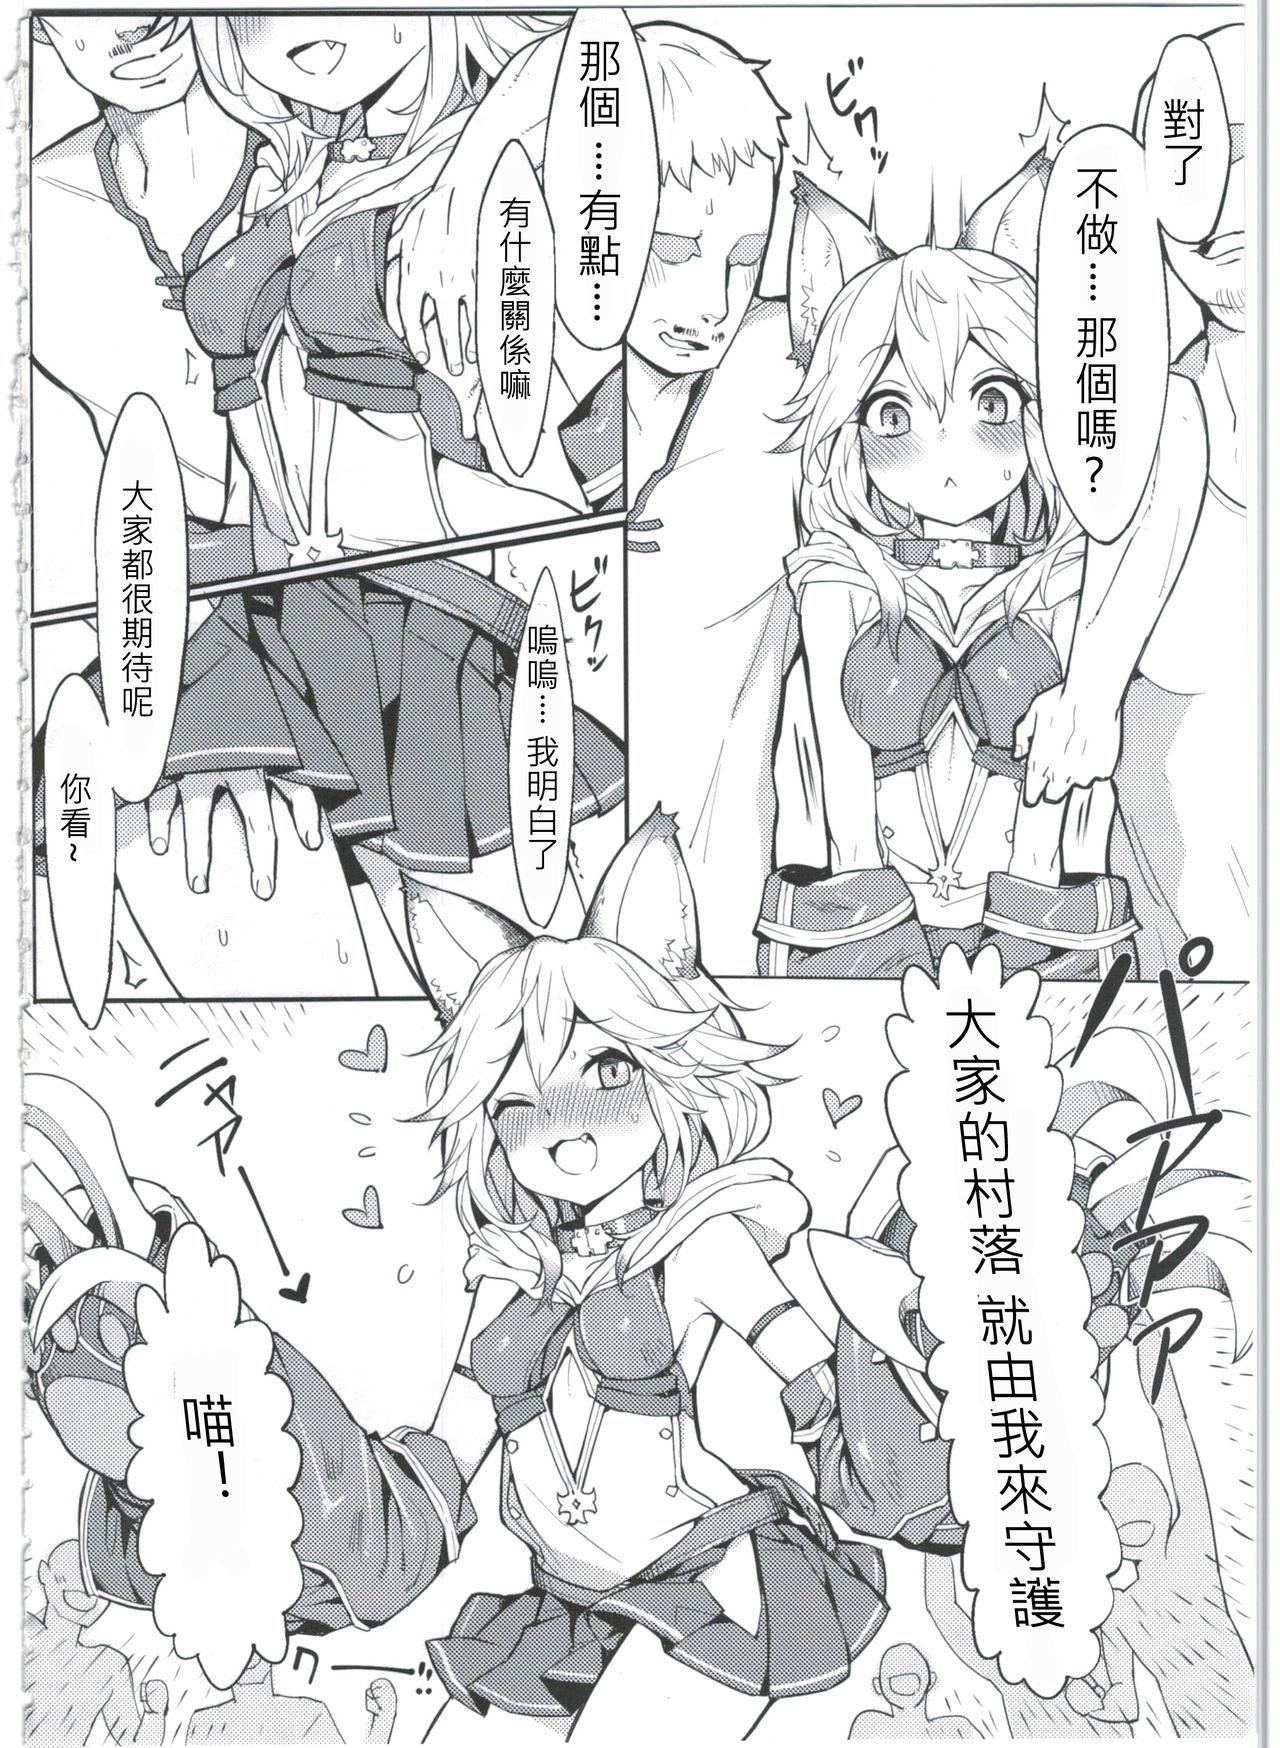 Butts Sen-chan! Nyan to Itte!! - Granblue fantasy Free - Page 4